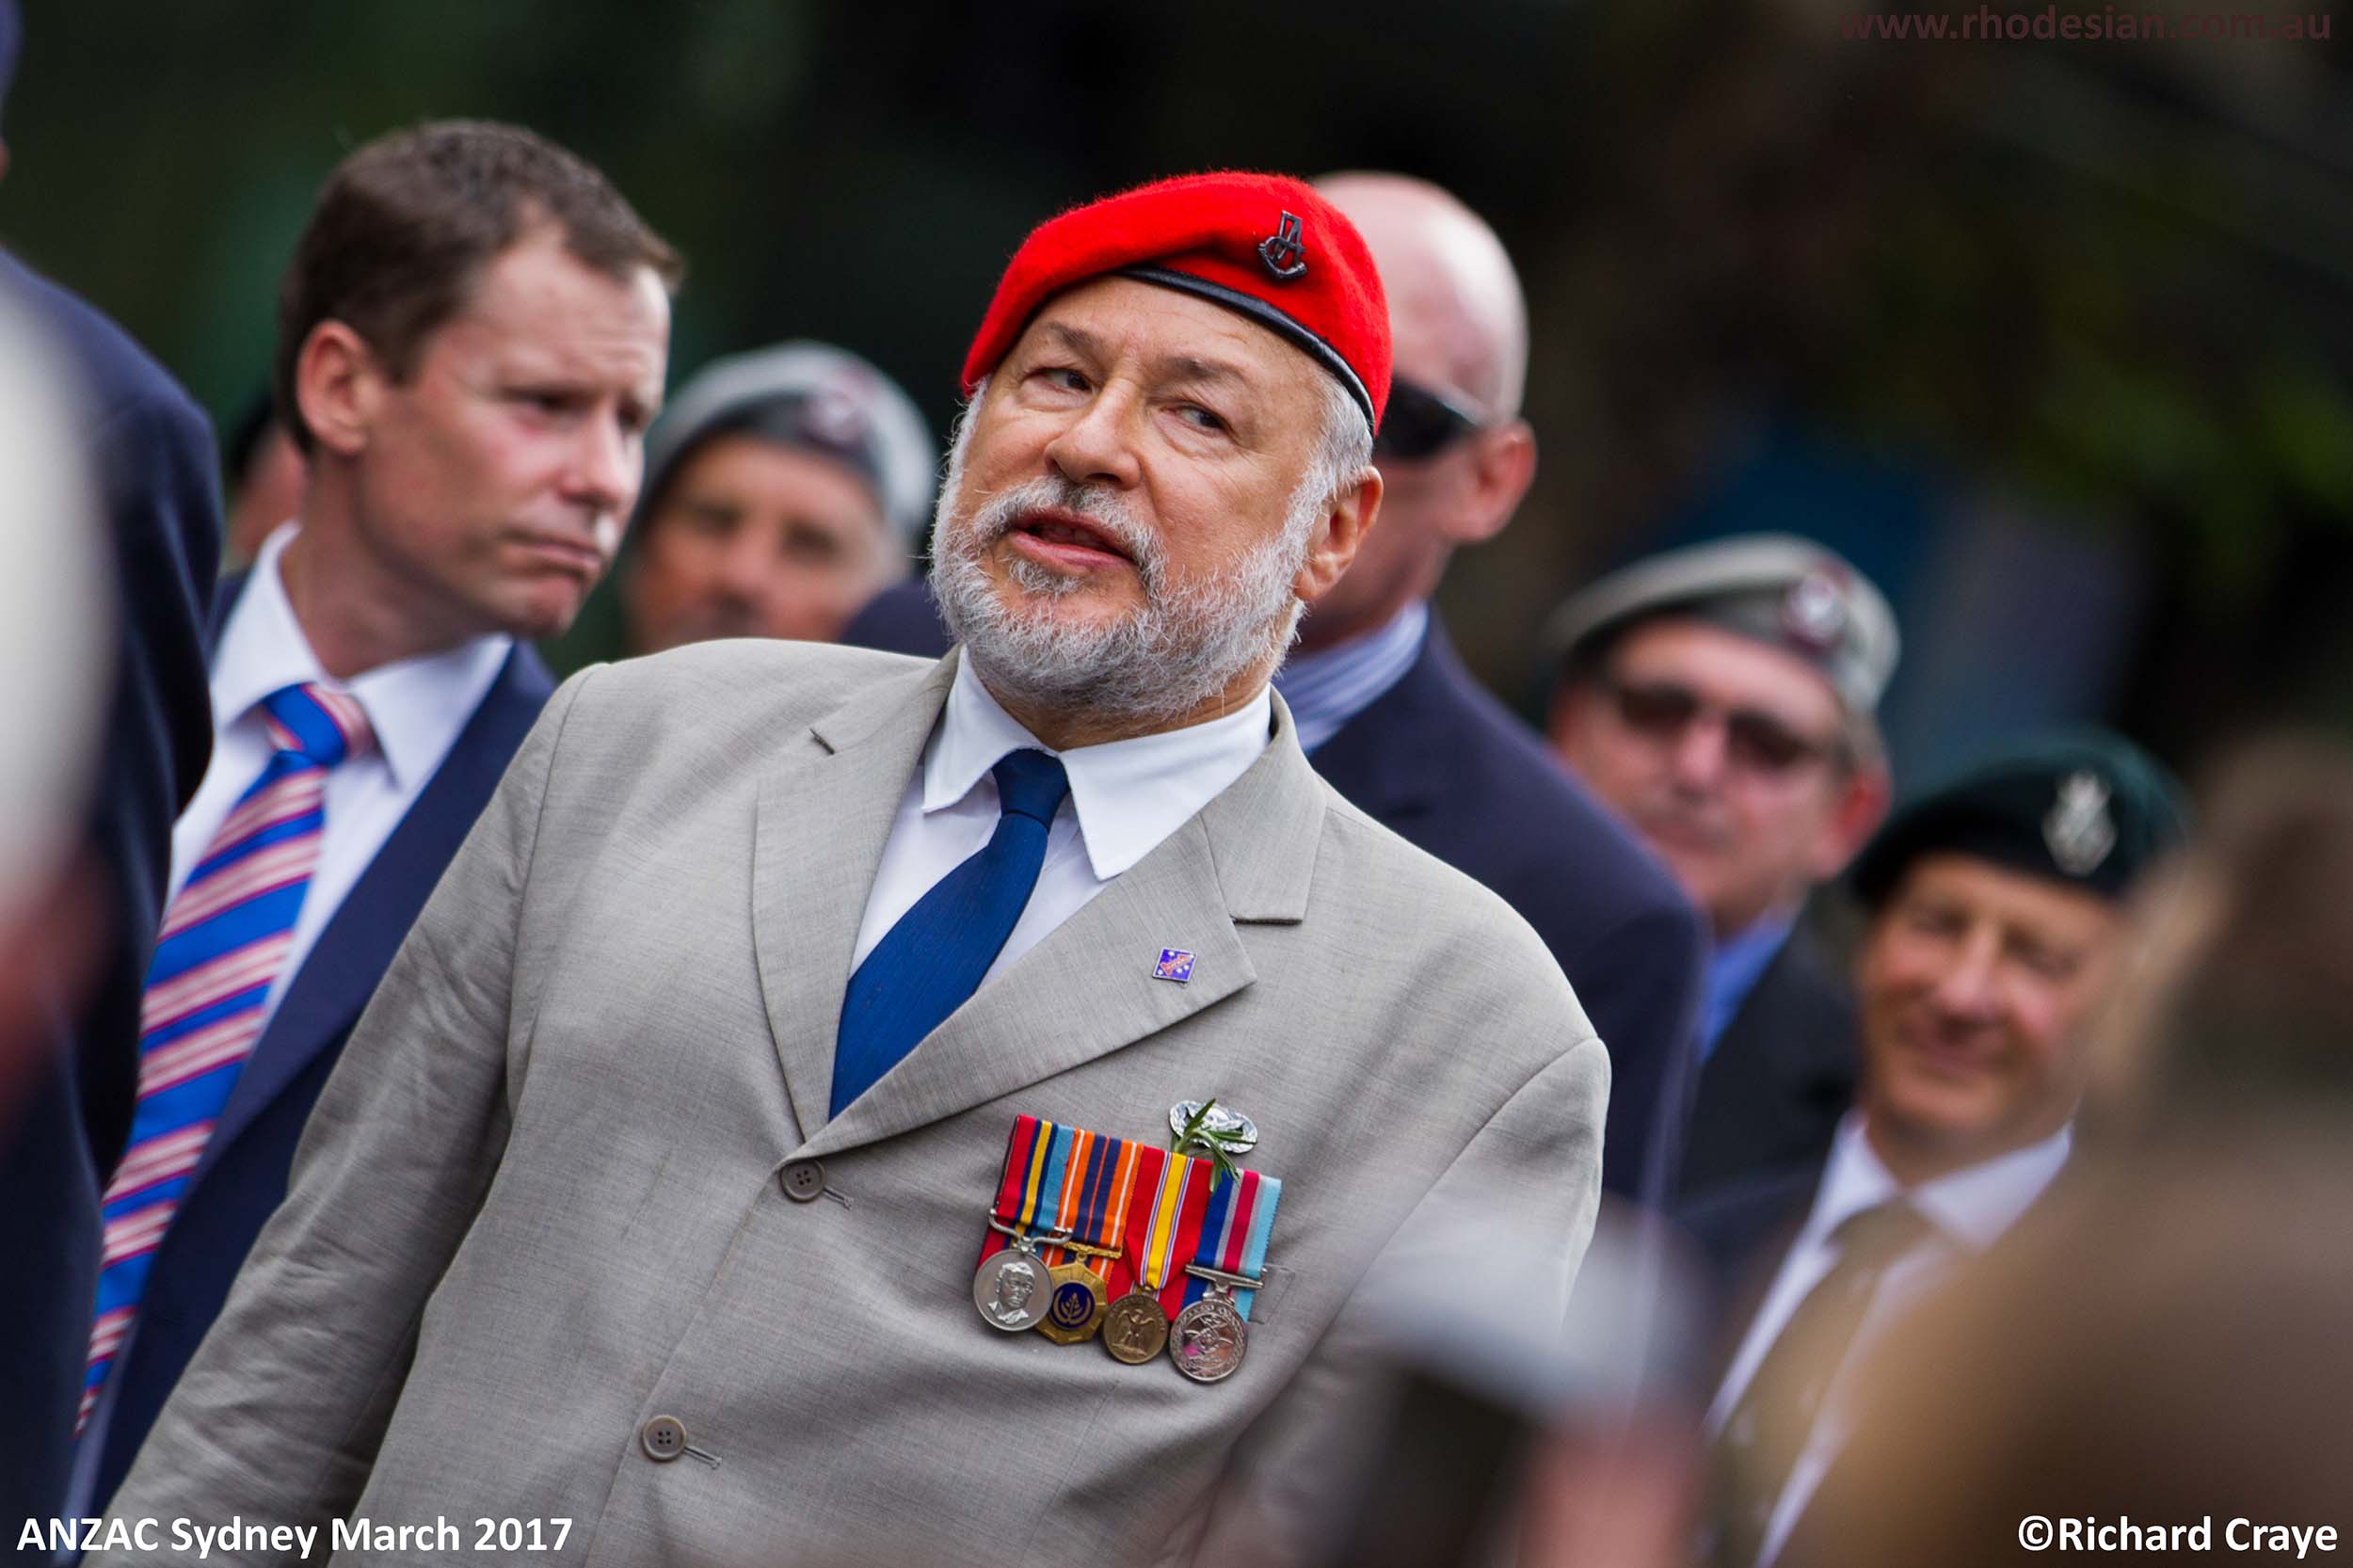 Rhodesian veteran calls out the time during ANZAC Day March in Sydney in 2017 on wwww.rhodesian.com.au